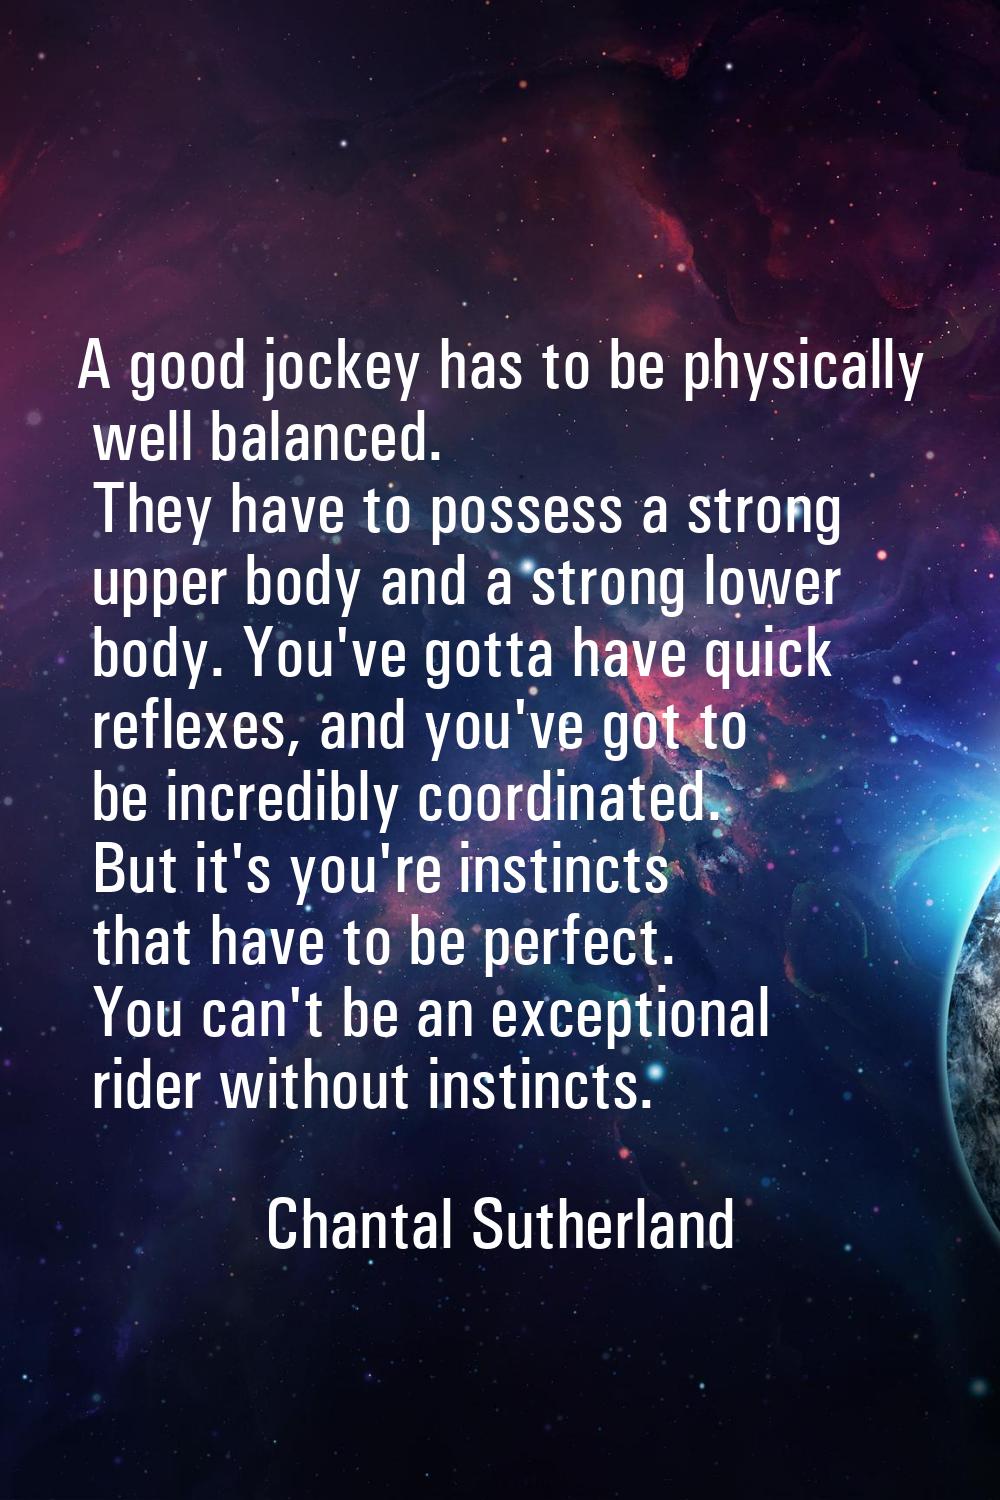 A good jockey has to be physically well balanced. They have to possess a strong upper body and a st